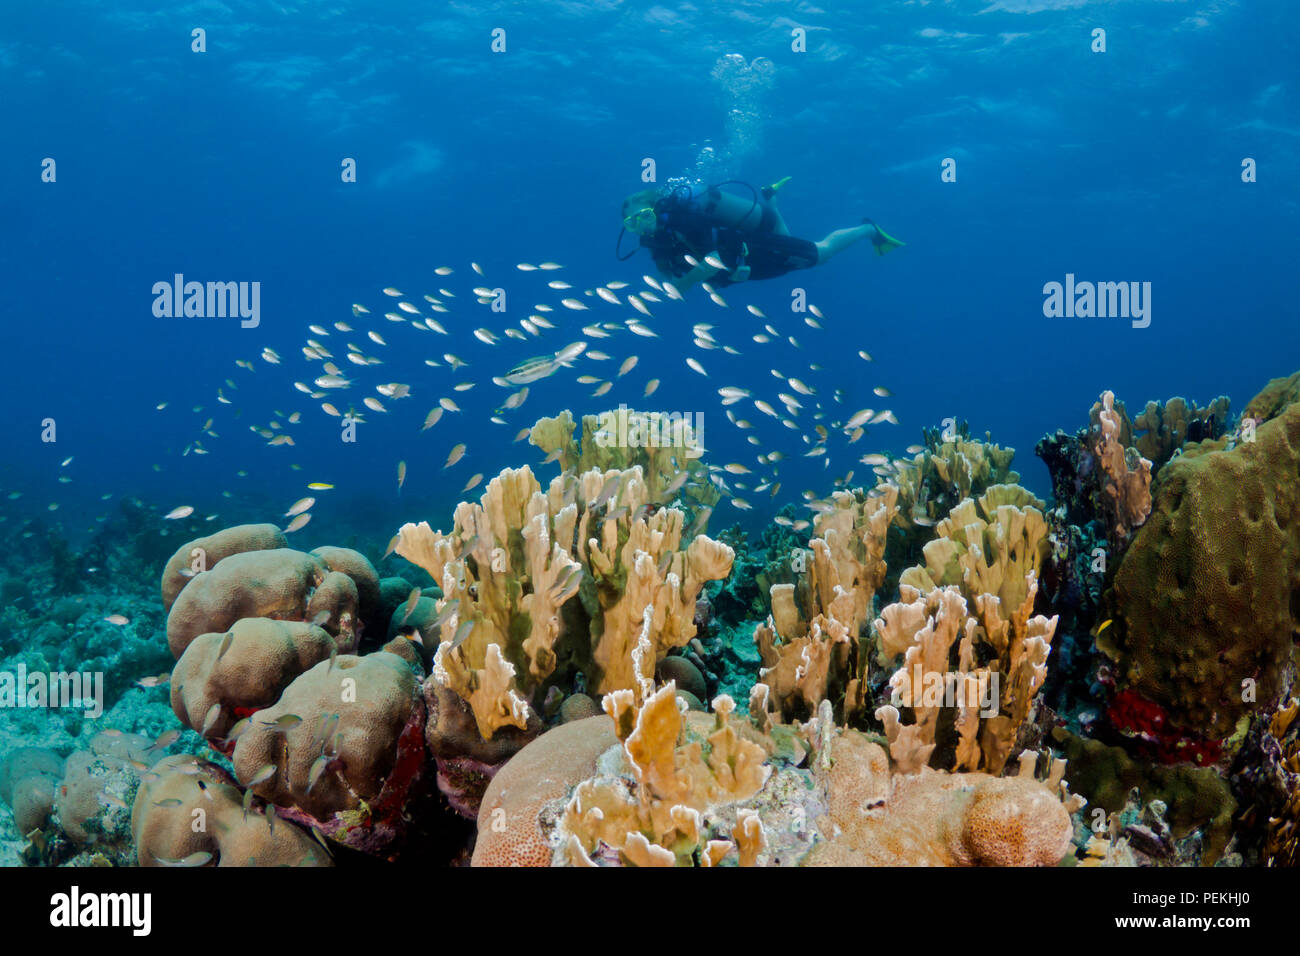 A diver and hard corals, on the Sea Aquarium House Reef off the island of Curacao in the Caribbean. Stock Photo